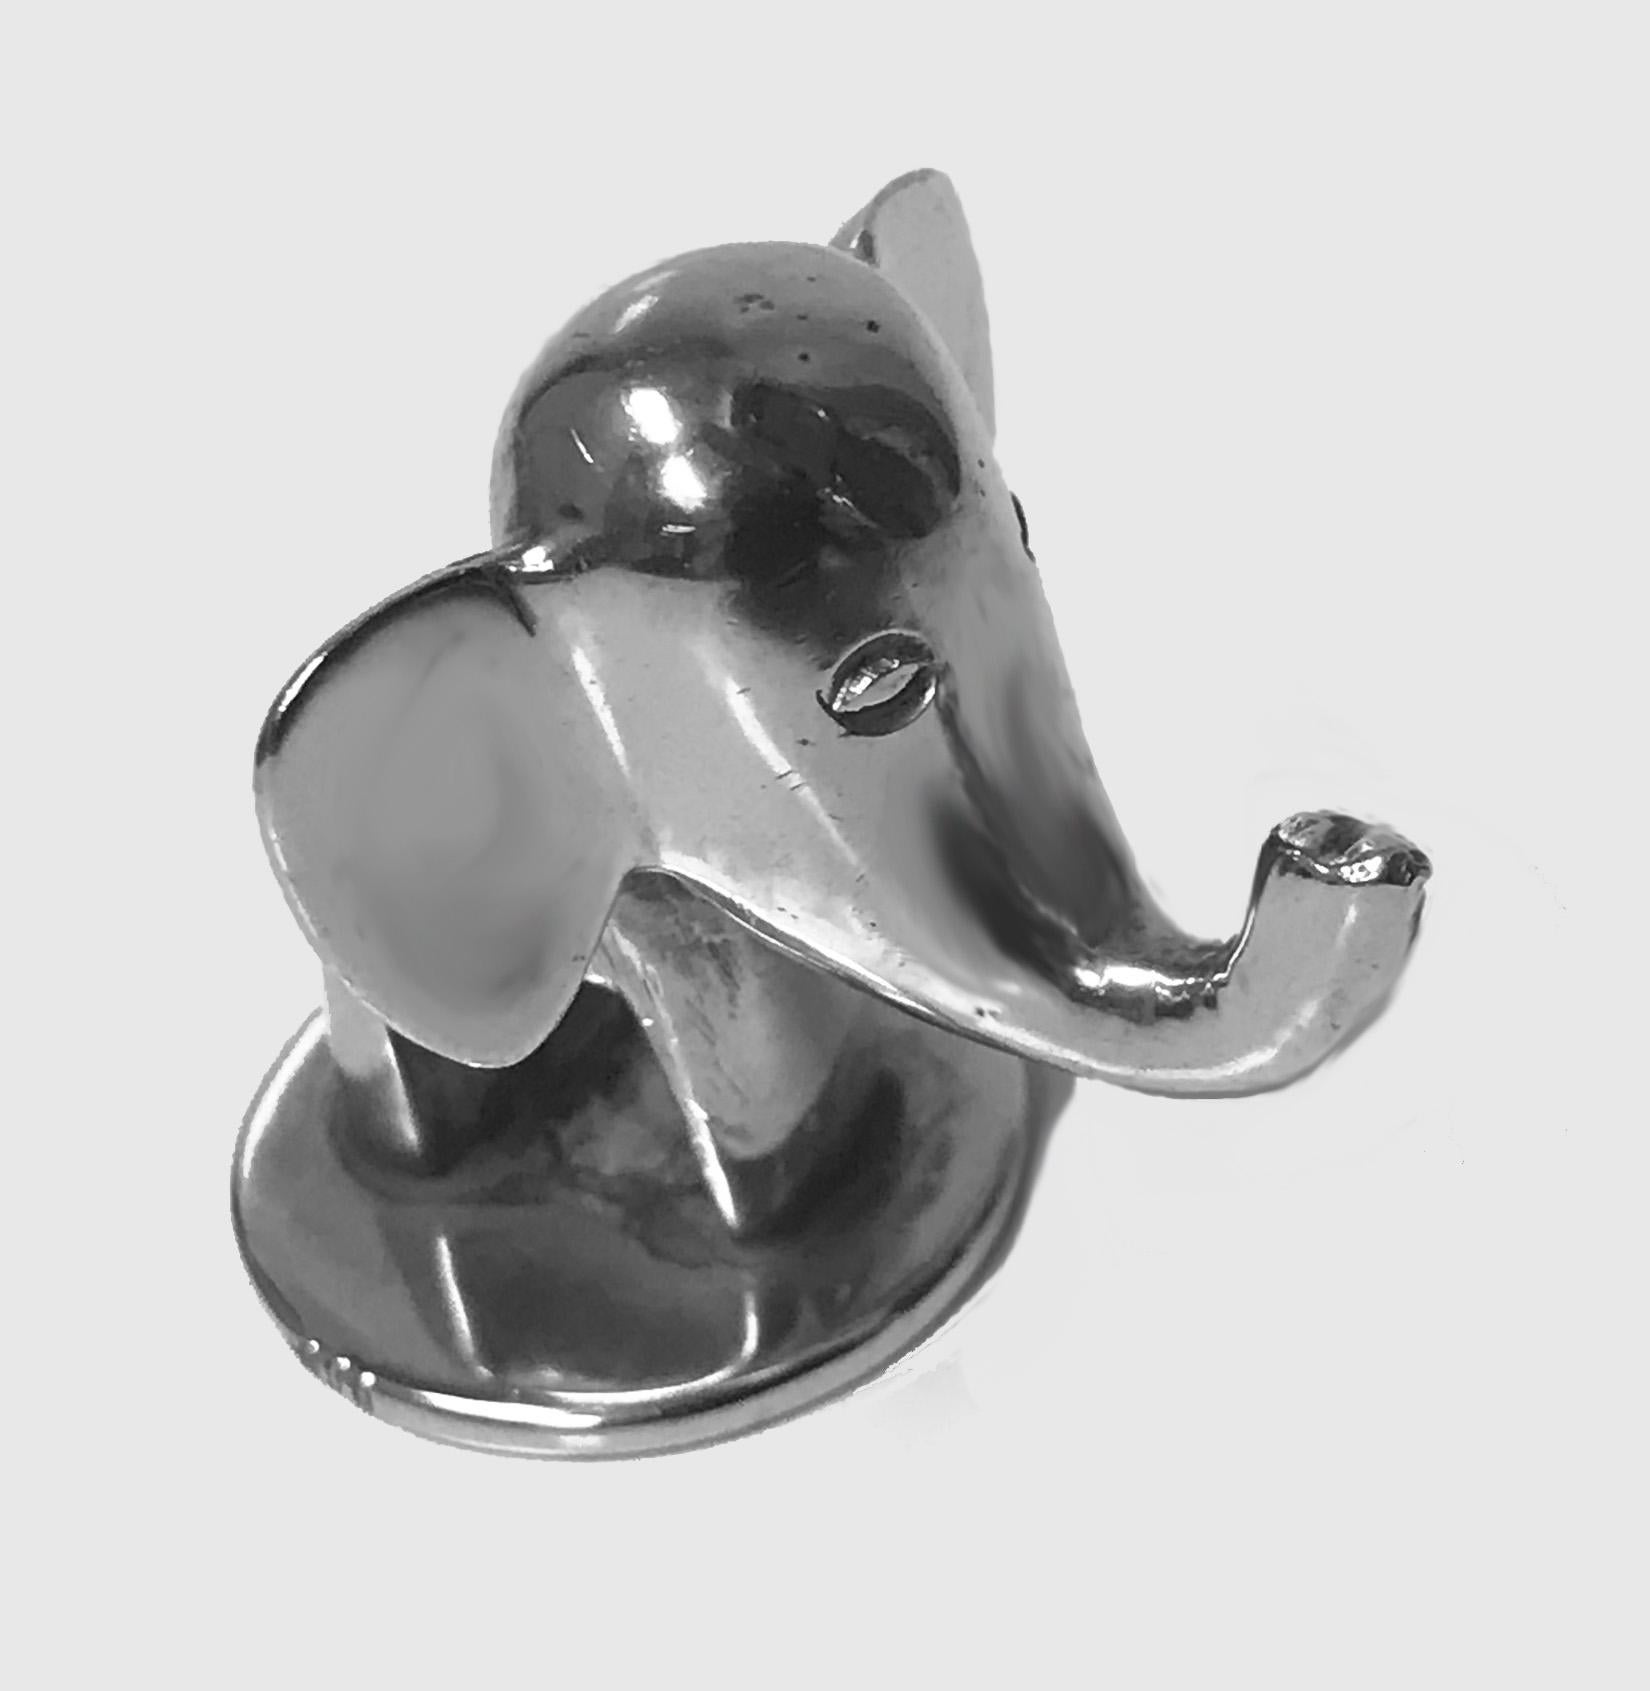 Silver 1950s Hagenauer style trumpeting Elephant. Stamped 900. Good solid example. Item weight: 58 grams. Measures: 1.5 x 1.5 inches.